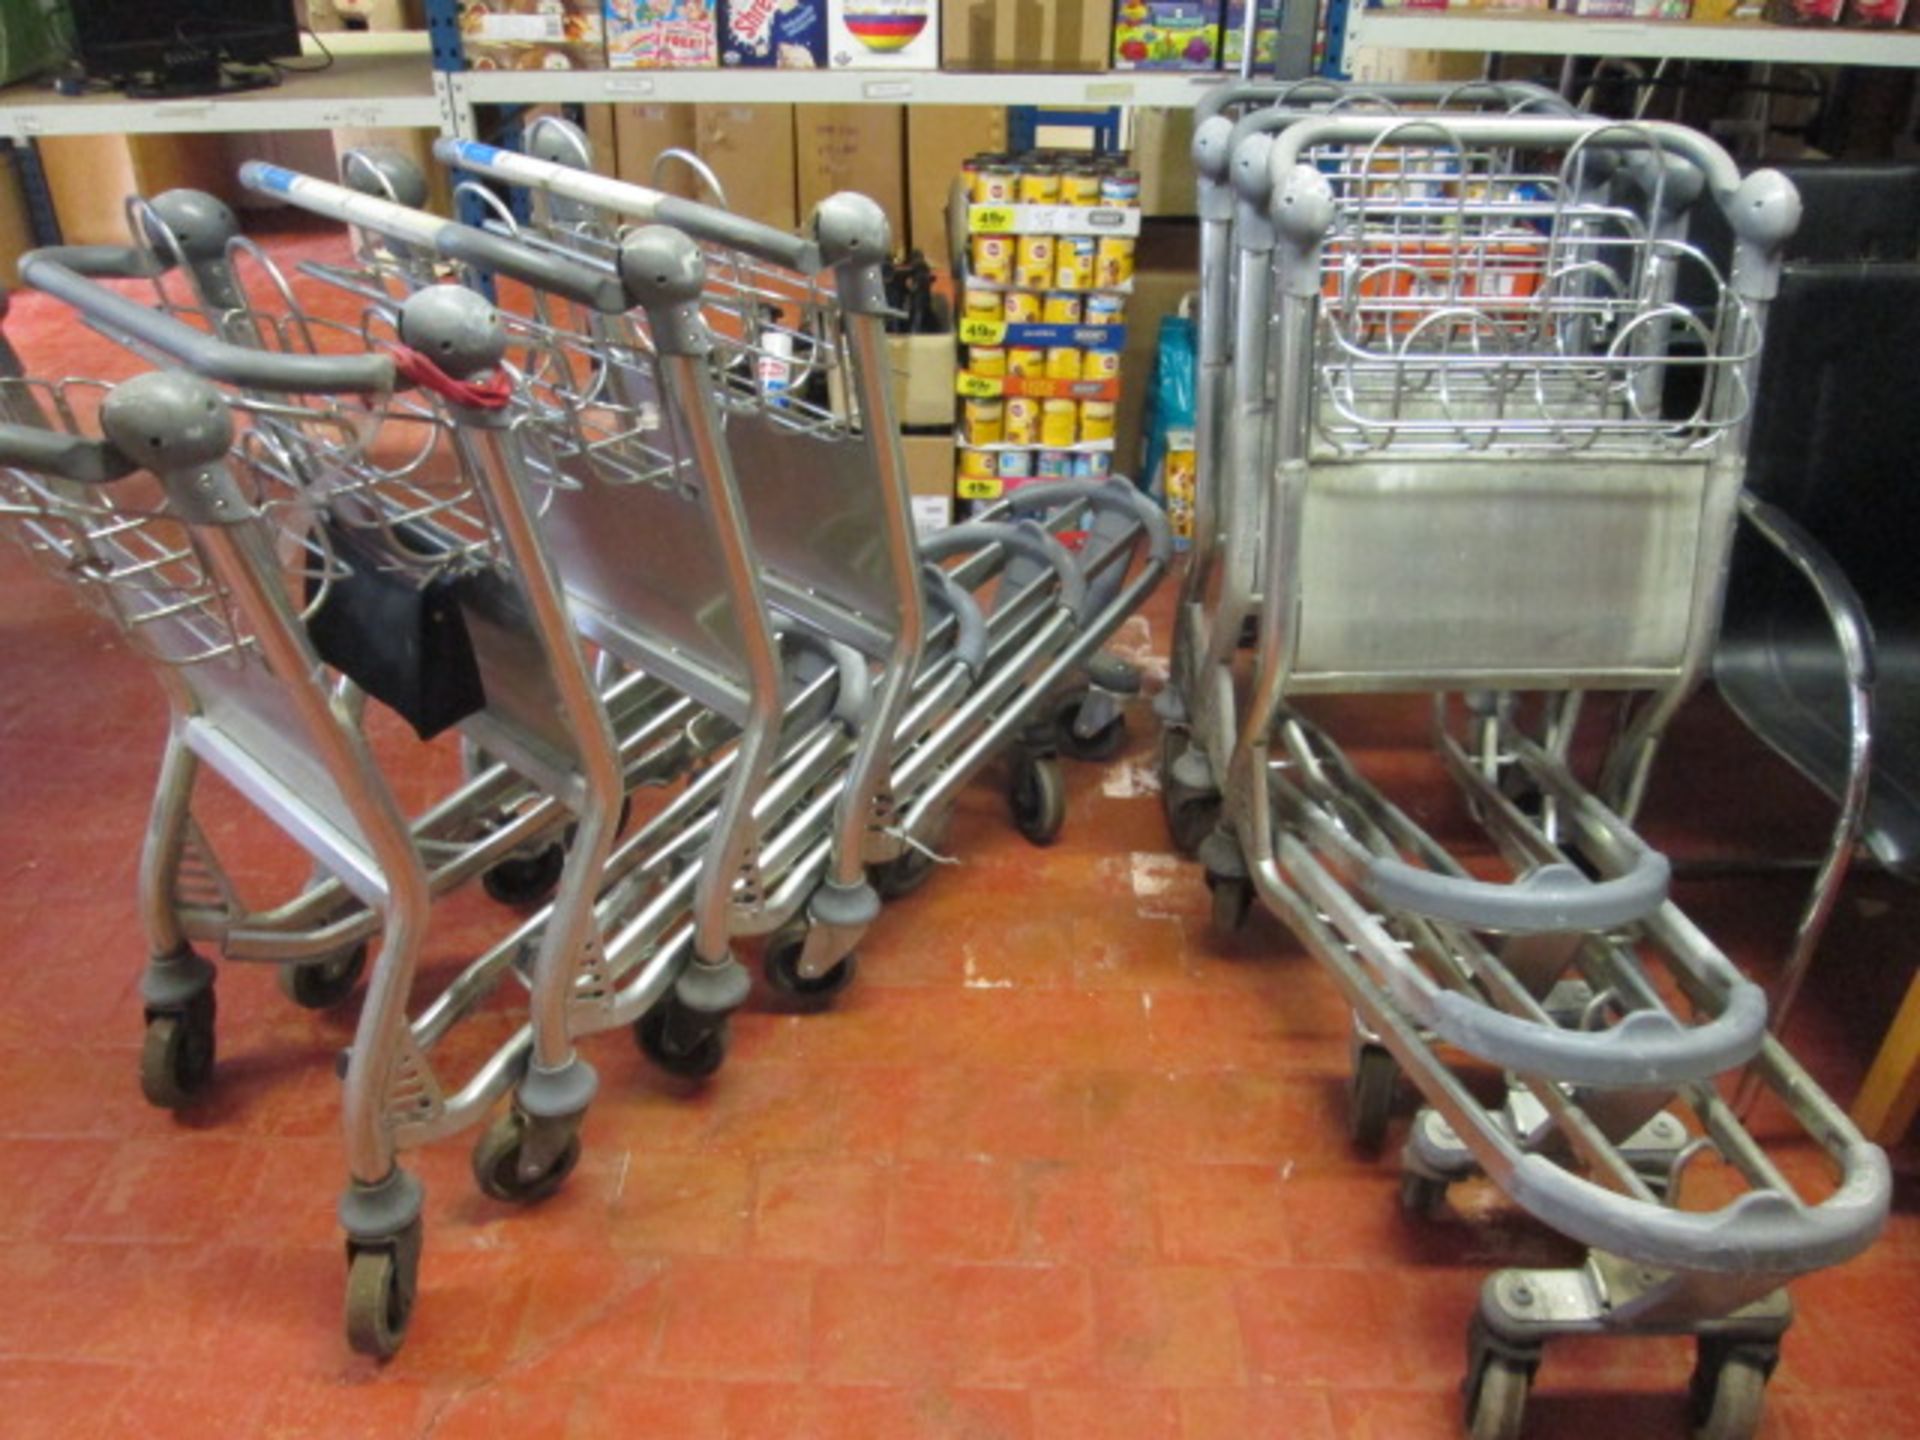 8 x Airport Style Baggage Trolleys with Custom Fitted Hand Car Wash Fibreglass Tanks. - Image 6 of 6